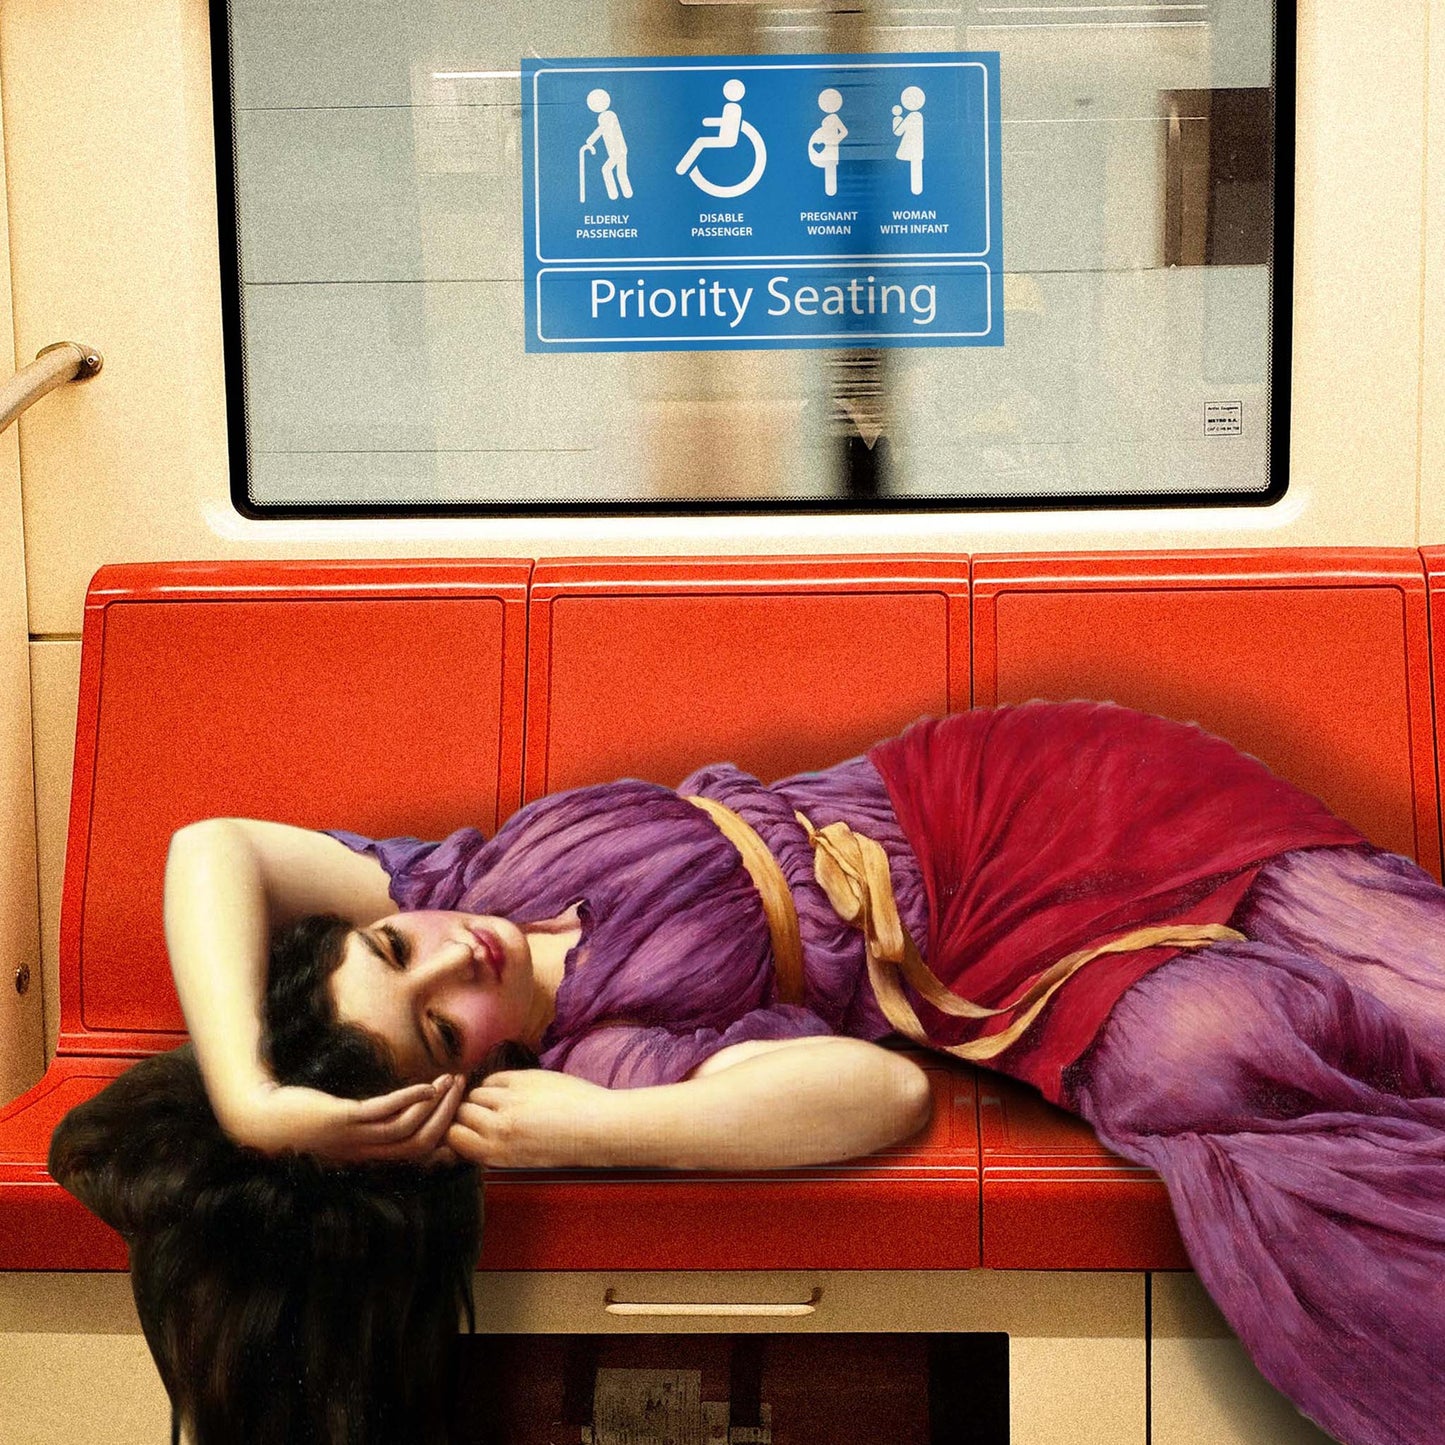 "Priority Seating" canvas print